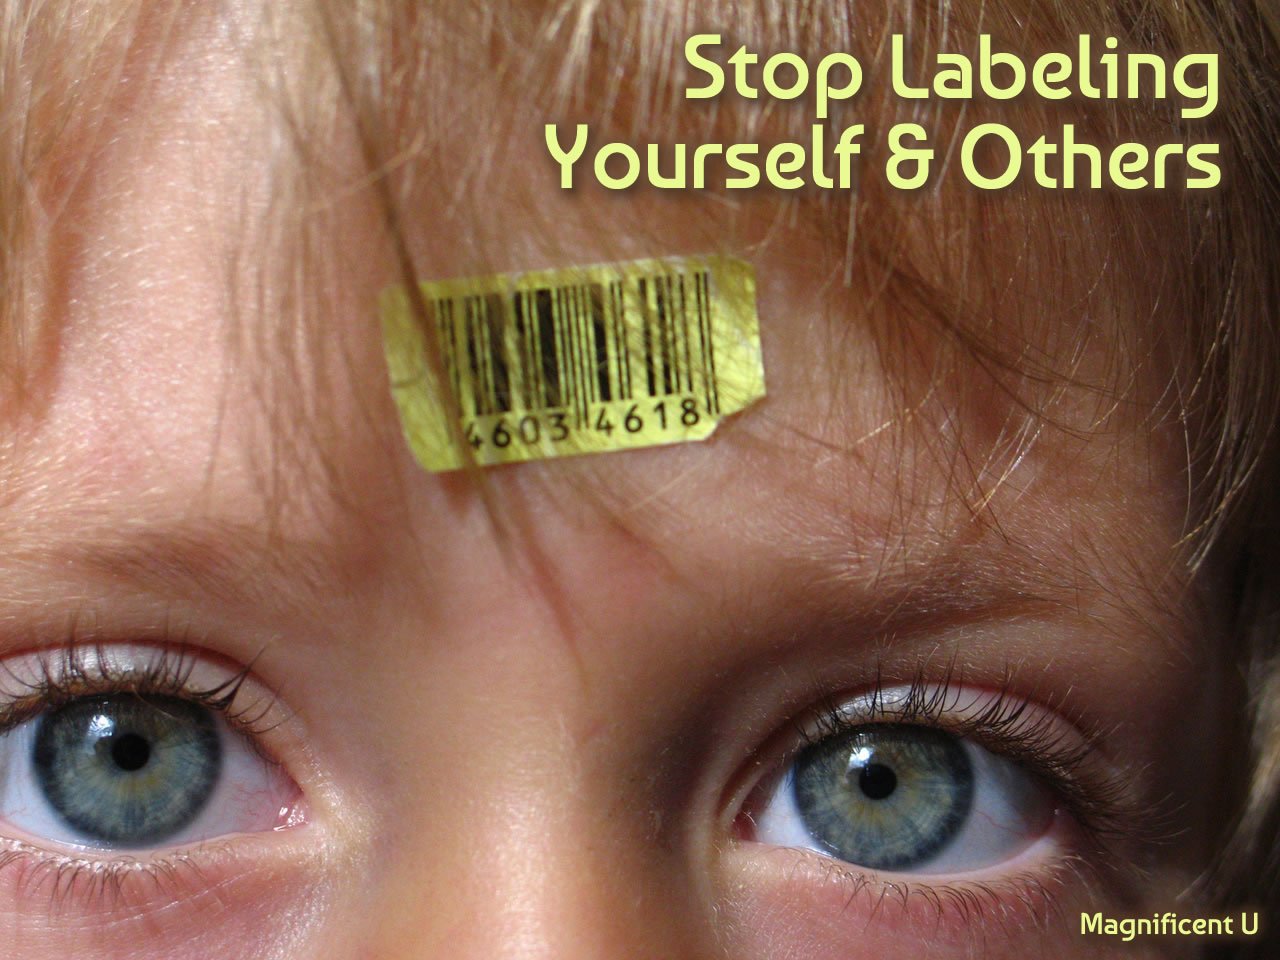 What Labels Do You Give Yourself and Others That Keep You From the Divine Truth?